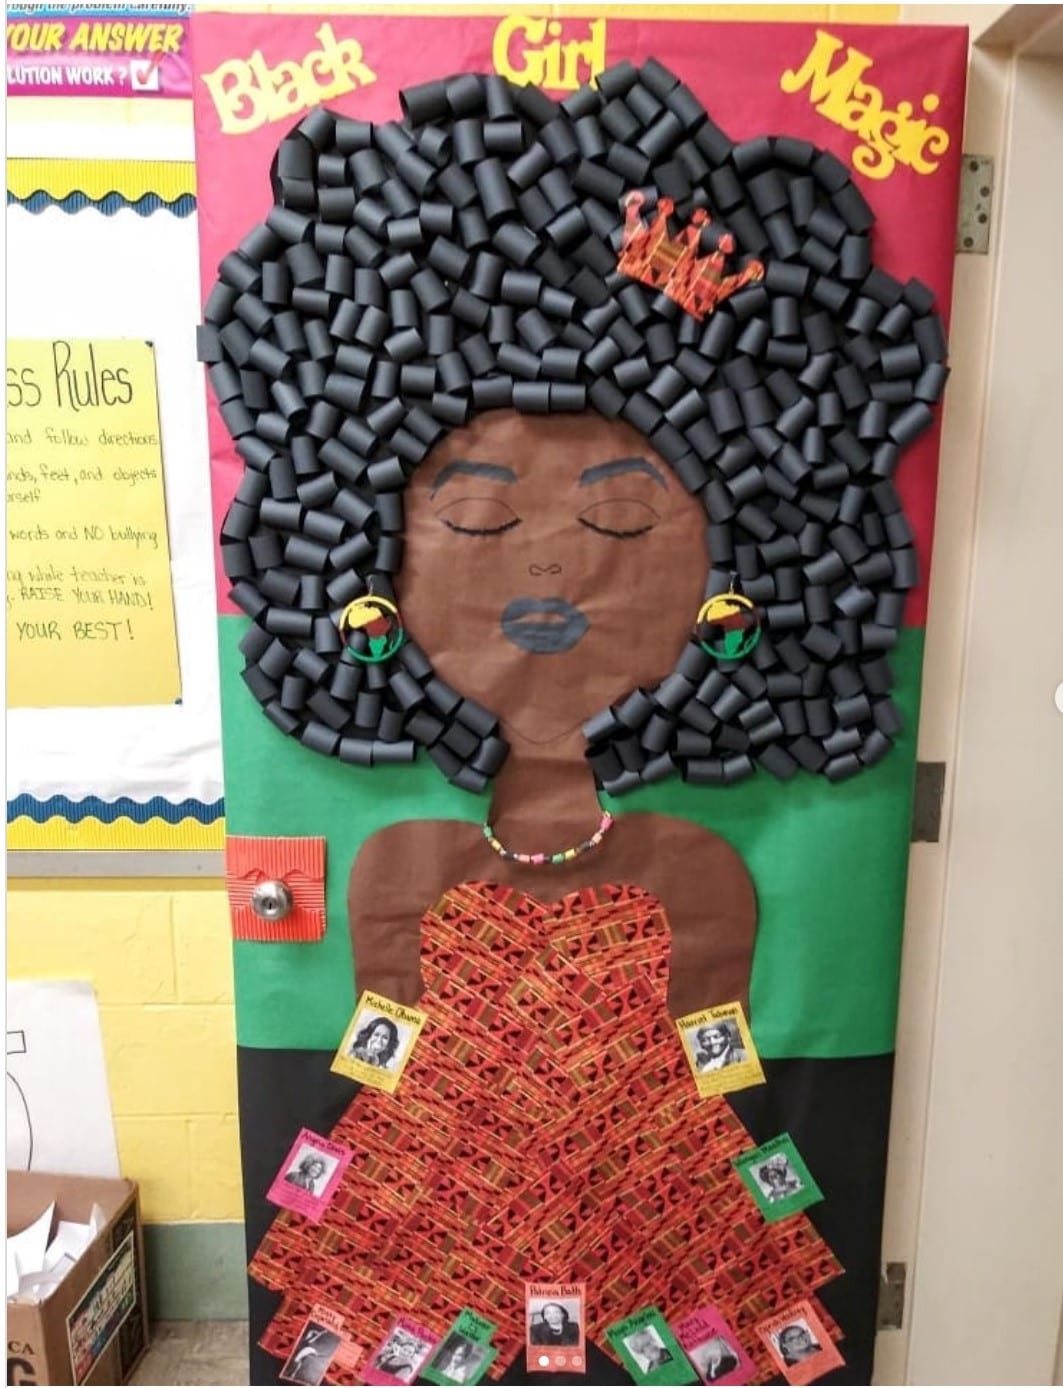 Classroom door titled "Black Girl Magic," showing a Black woman with hair made from black paper curls